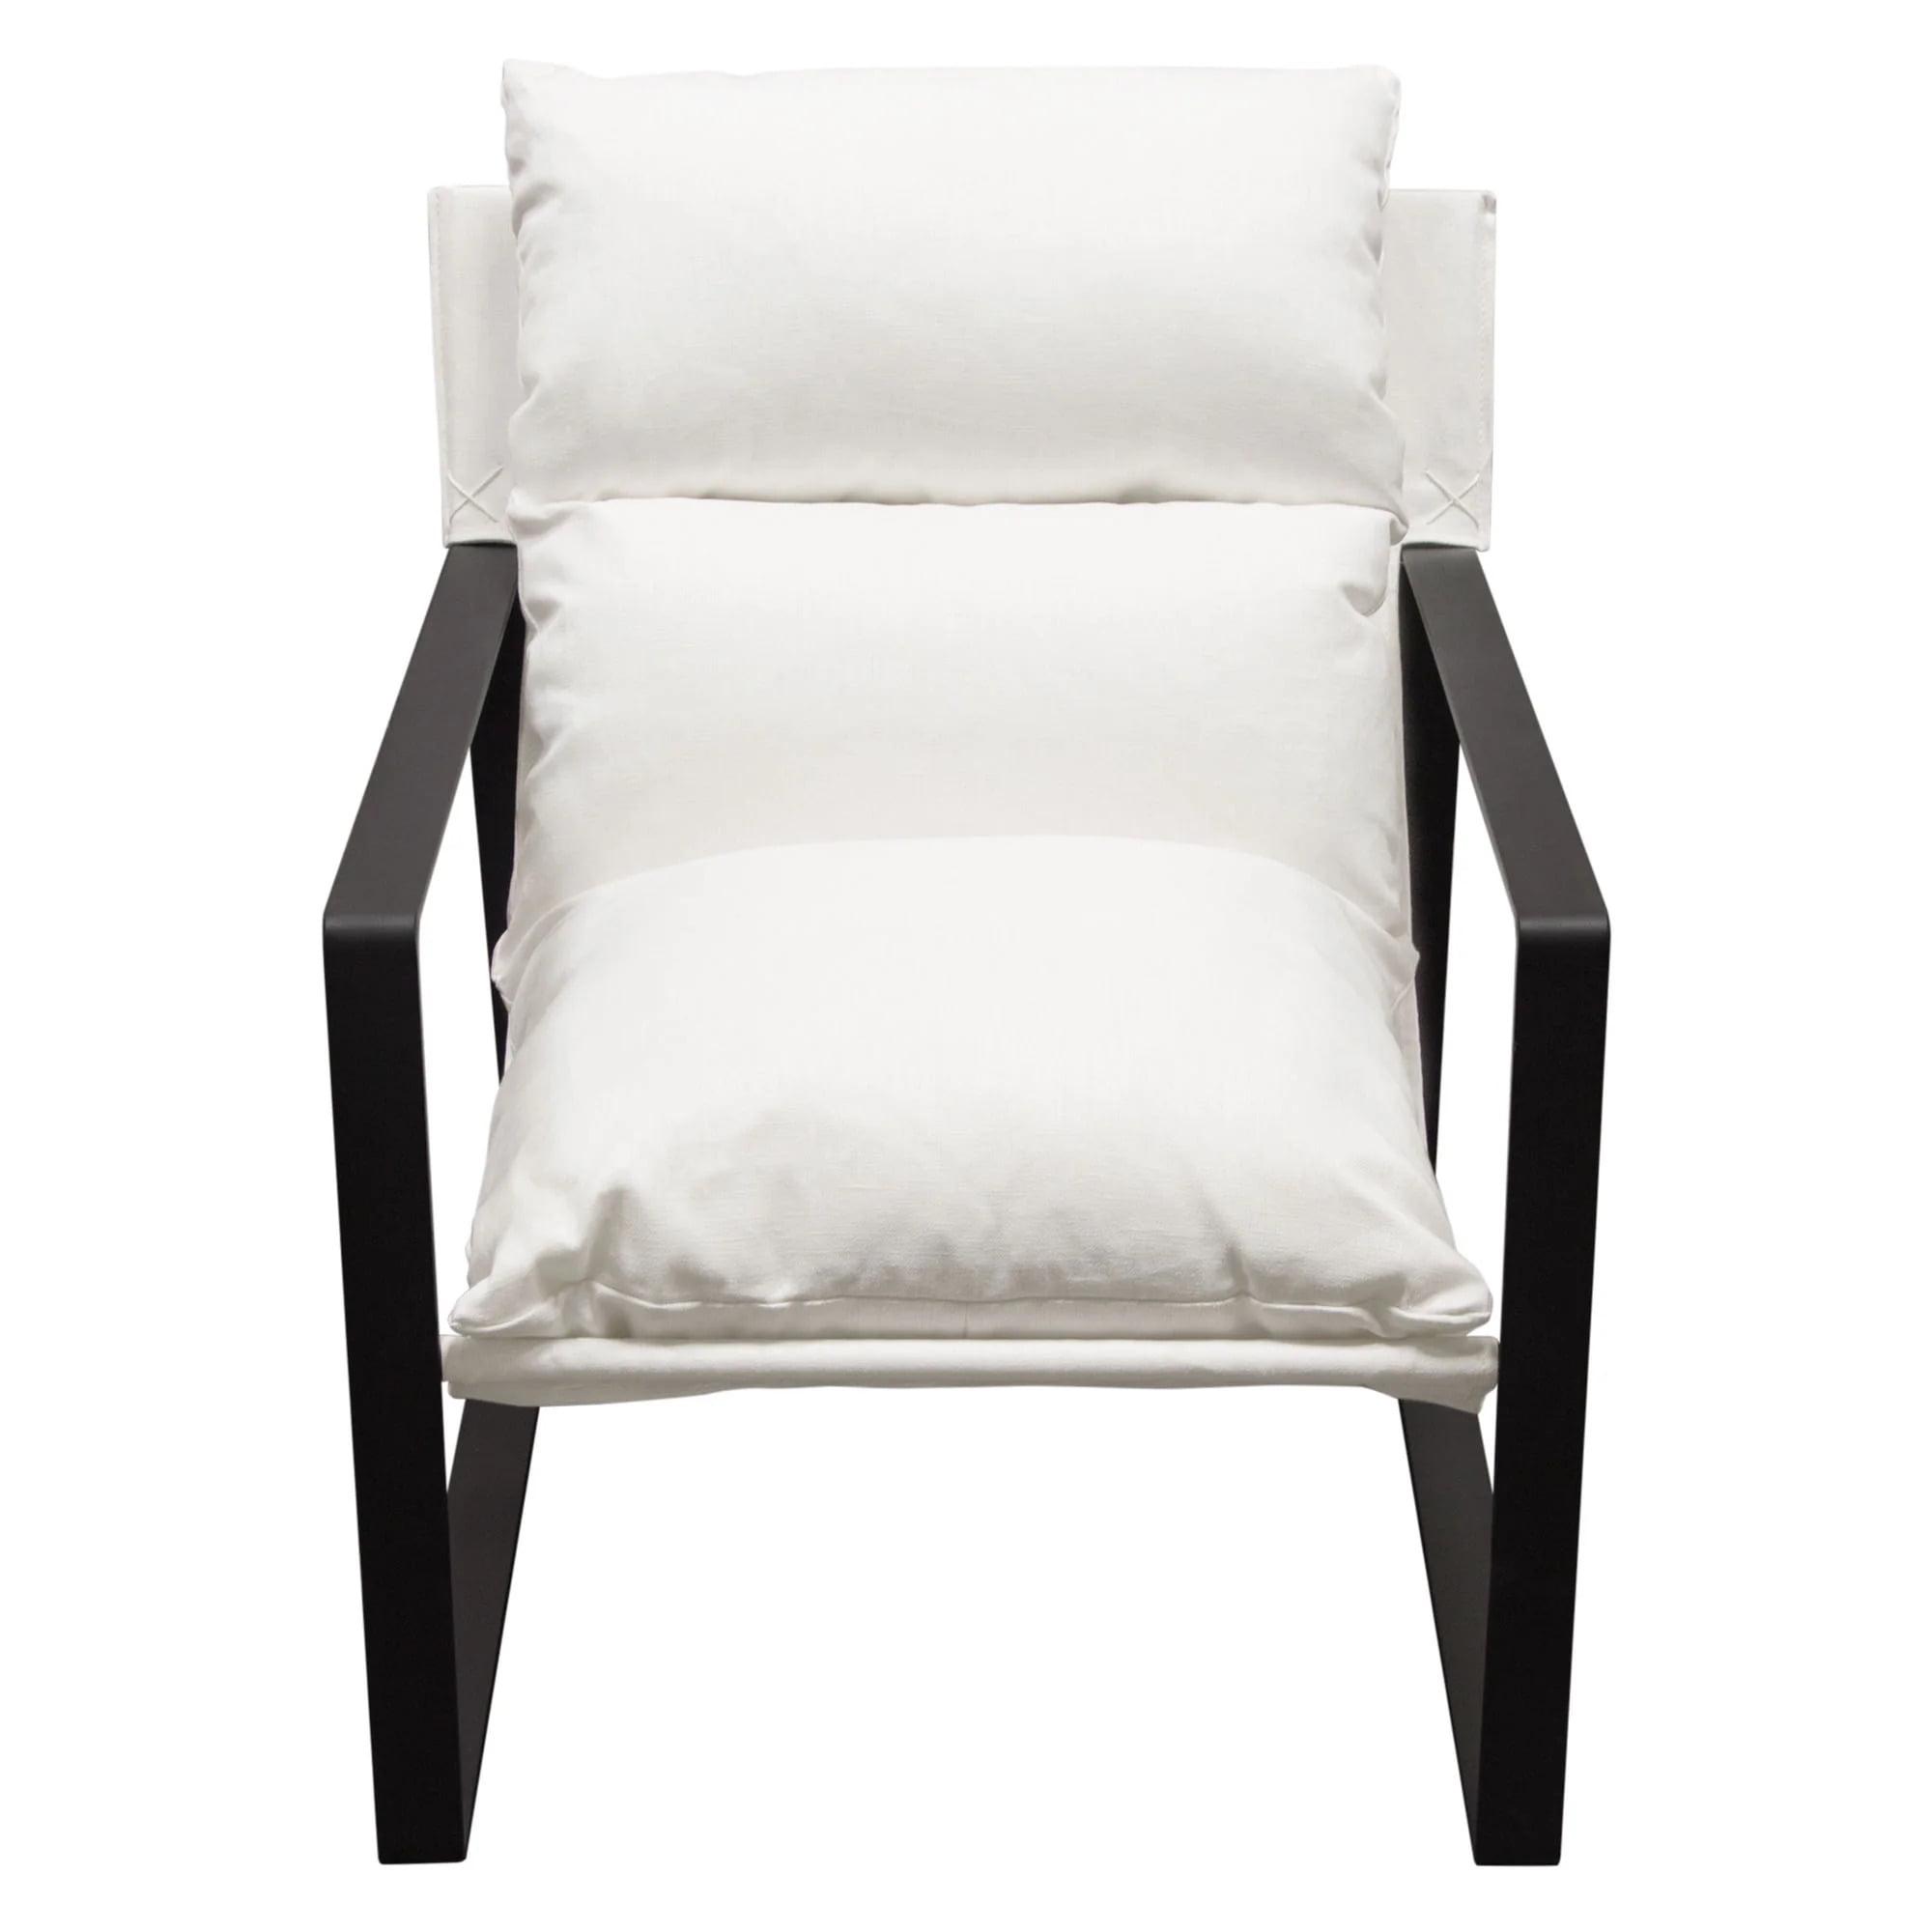 Miller Chic White Linen and Black Metal Sling Accent Chair